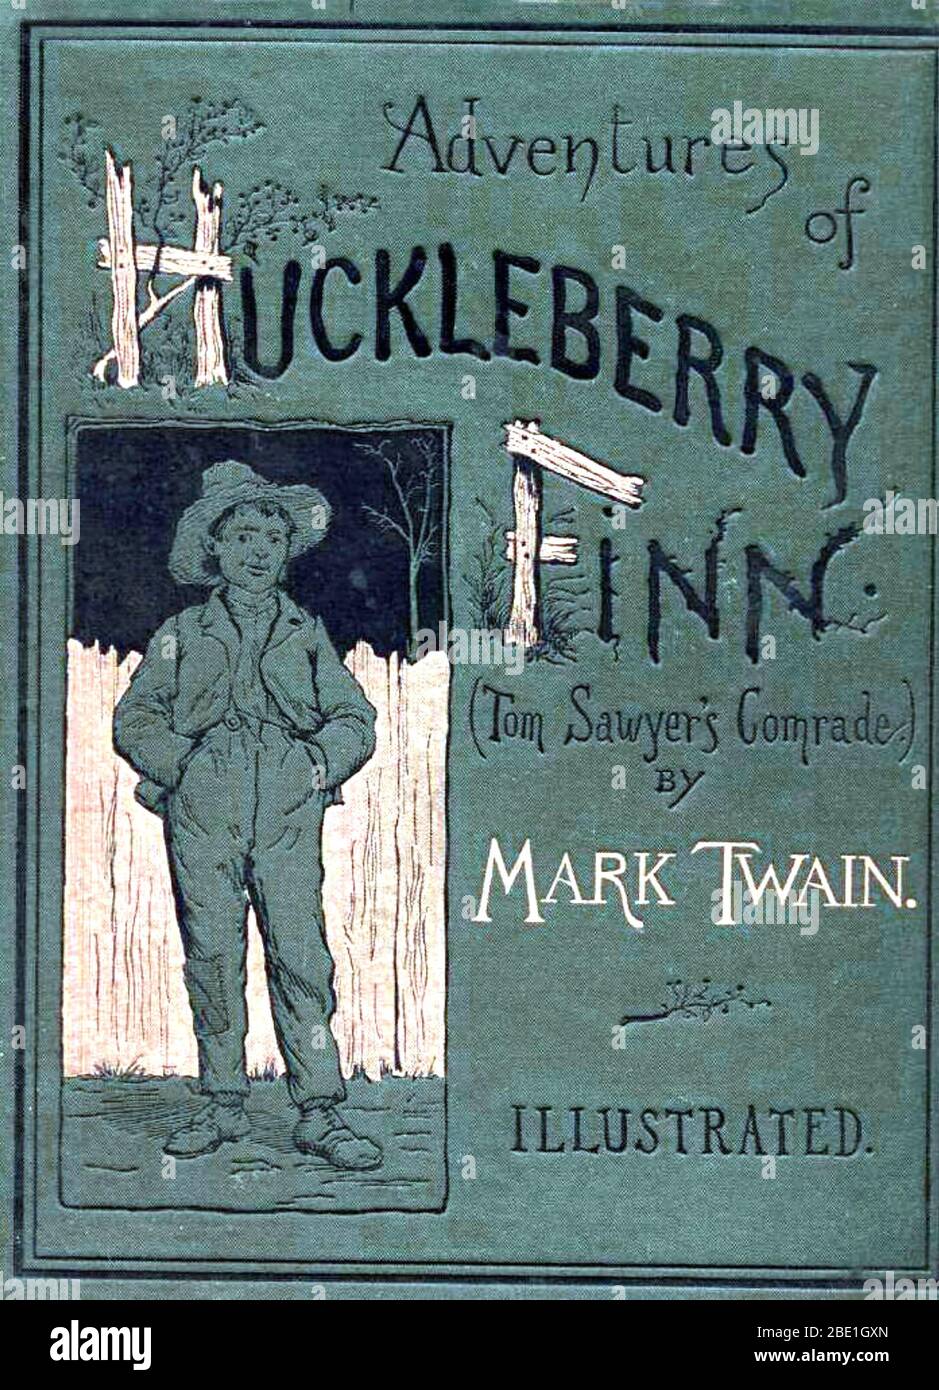 HUCKLEBERRY FINN by Mark Twain. Cover of the original 1884 edition with illustration by Edward Kemble Stock Photo